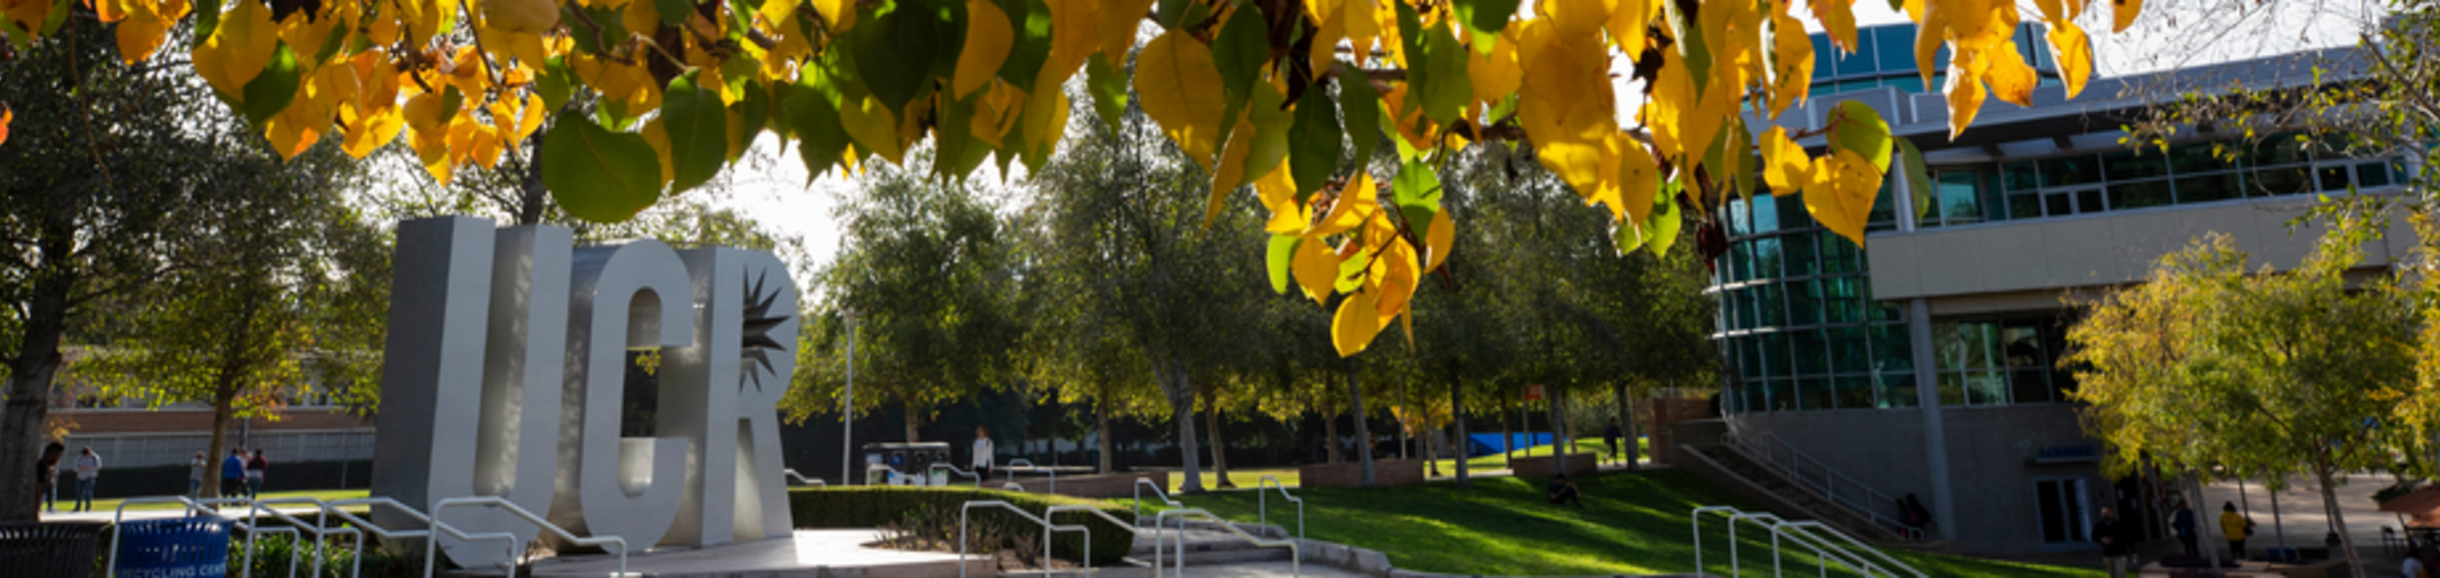 UCR Letters in Fall